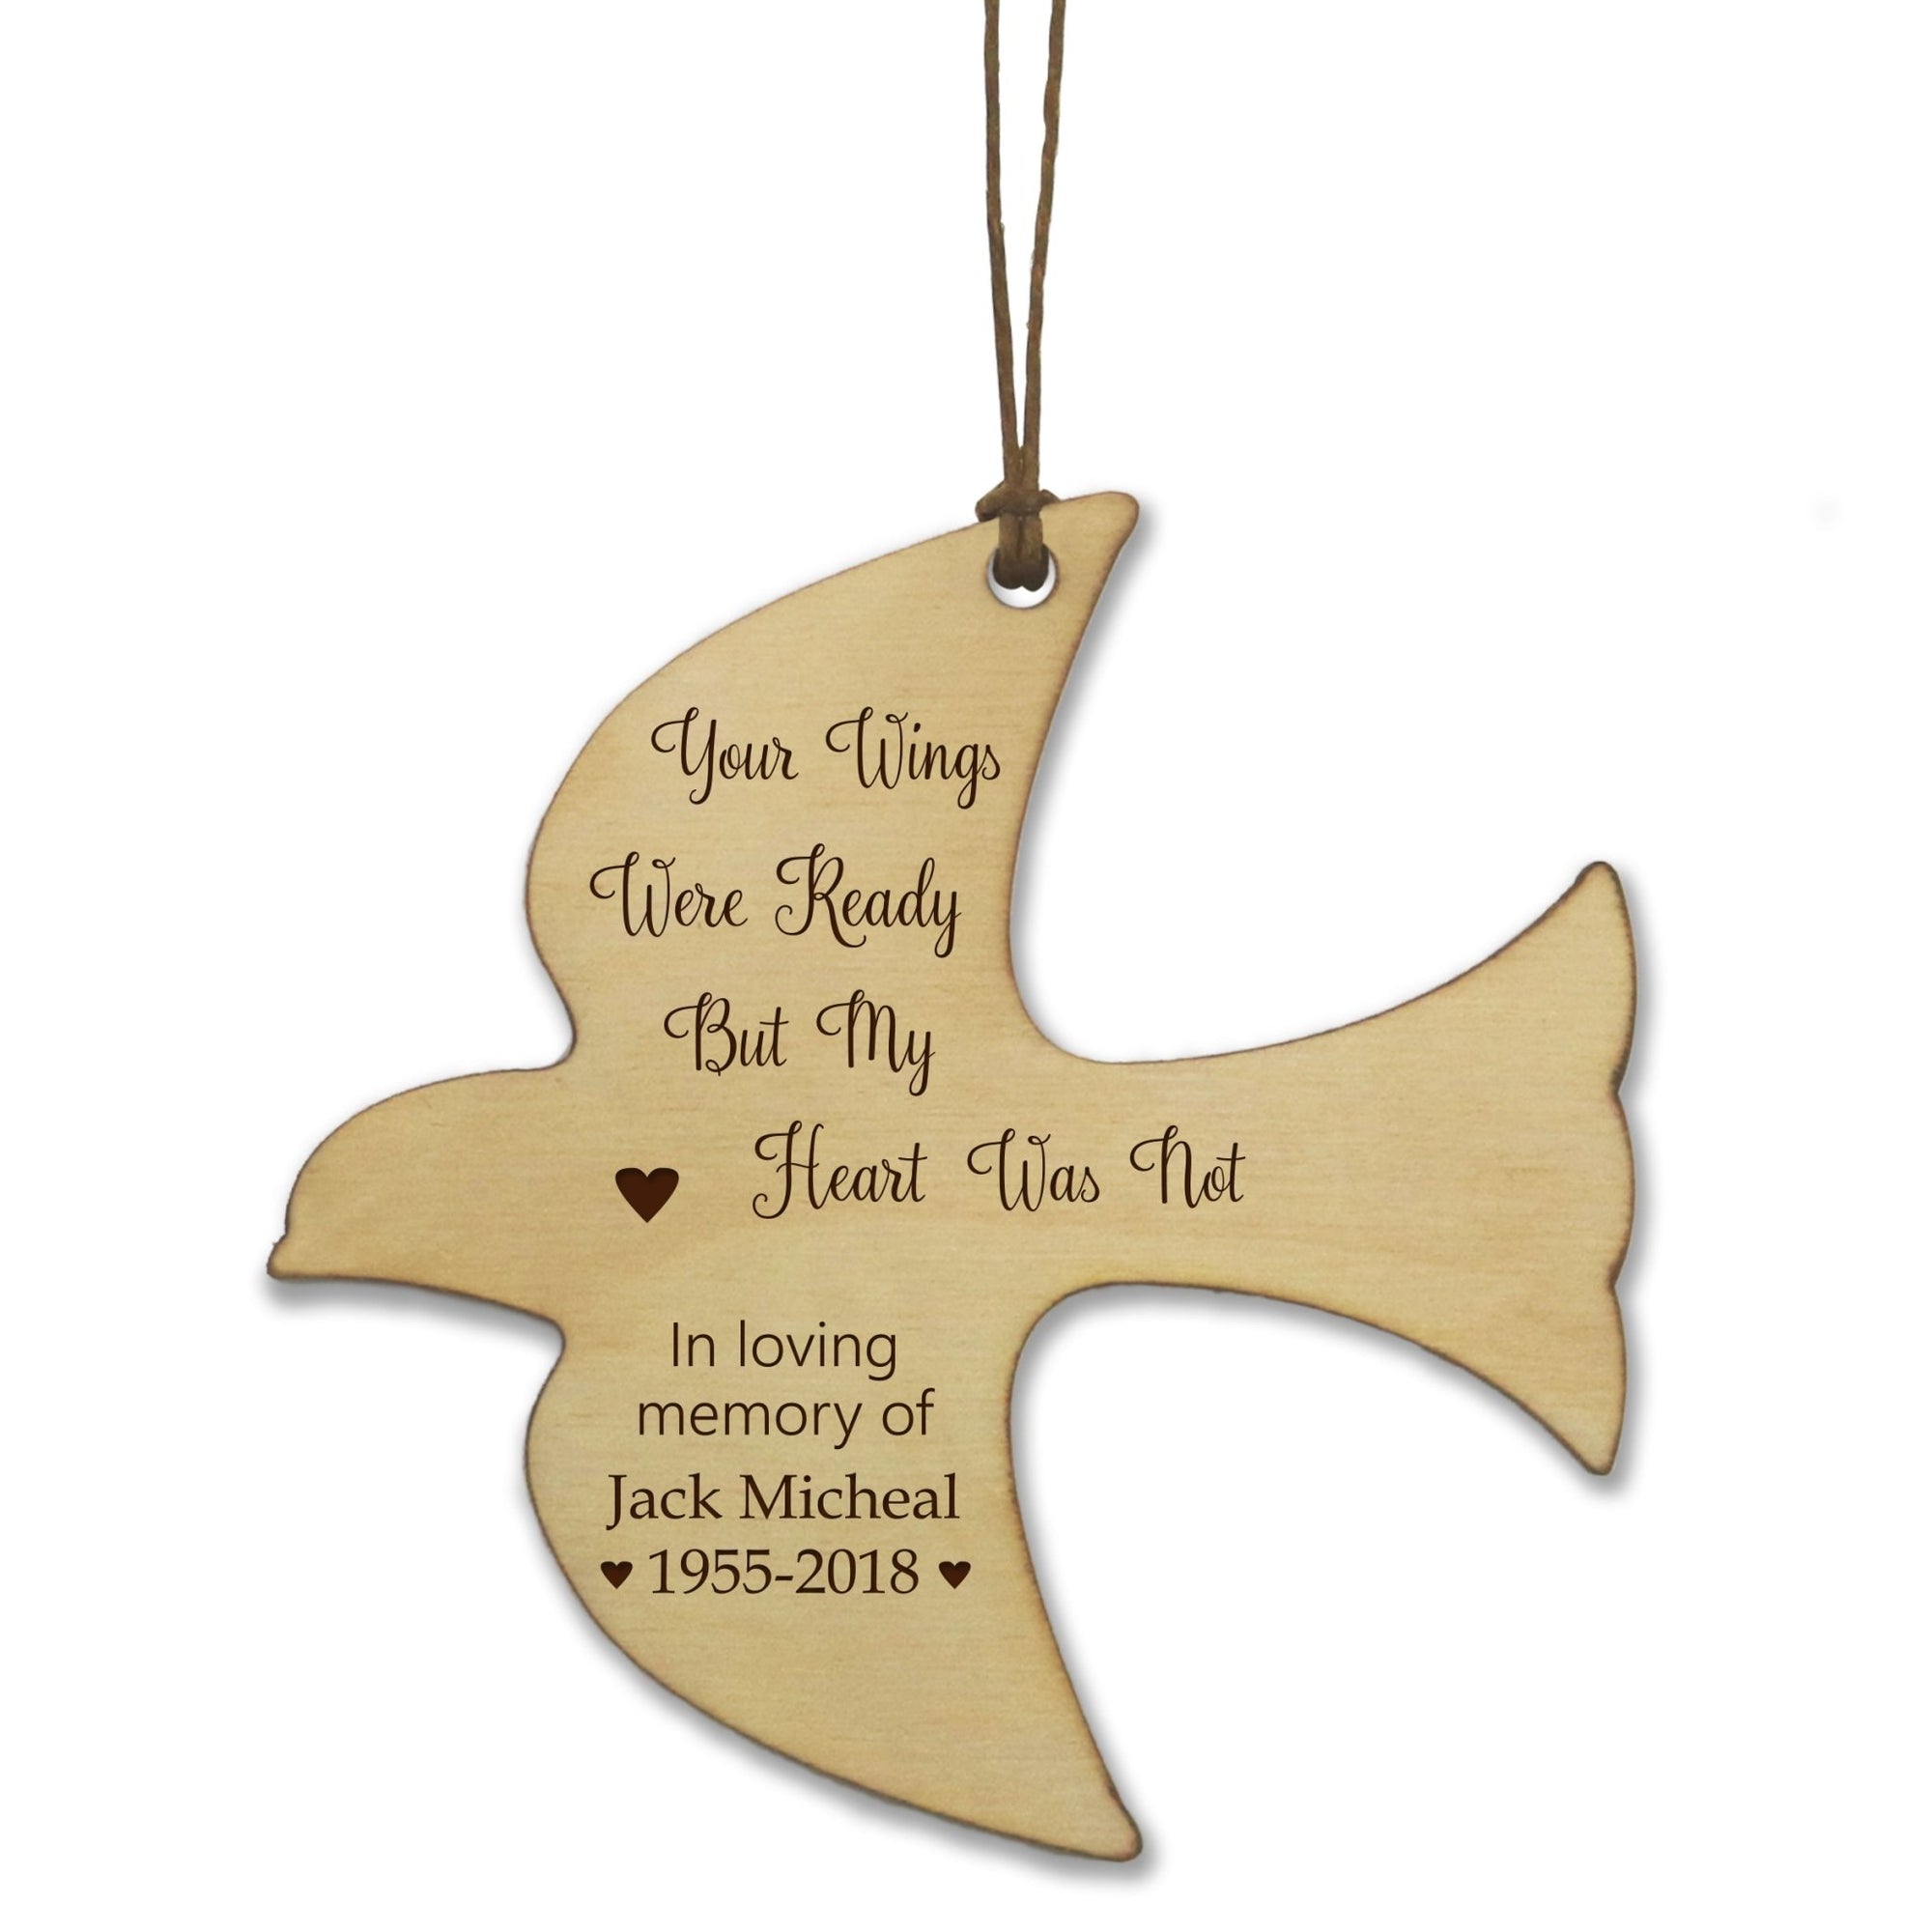 Custom Engraved Memorial Ornament for Loss of Loved One-Your Wings Were Ready My Love - LifeSong Milestones